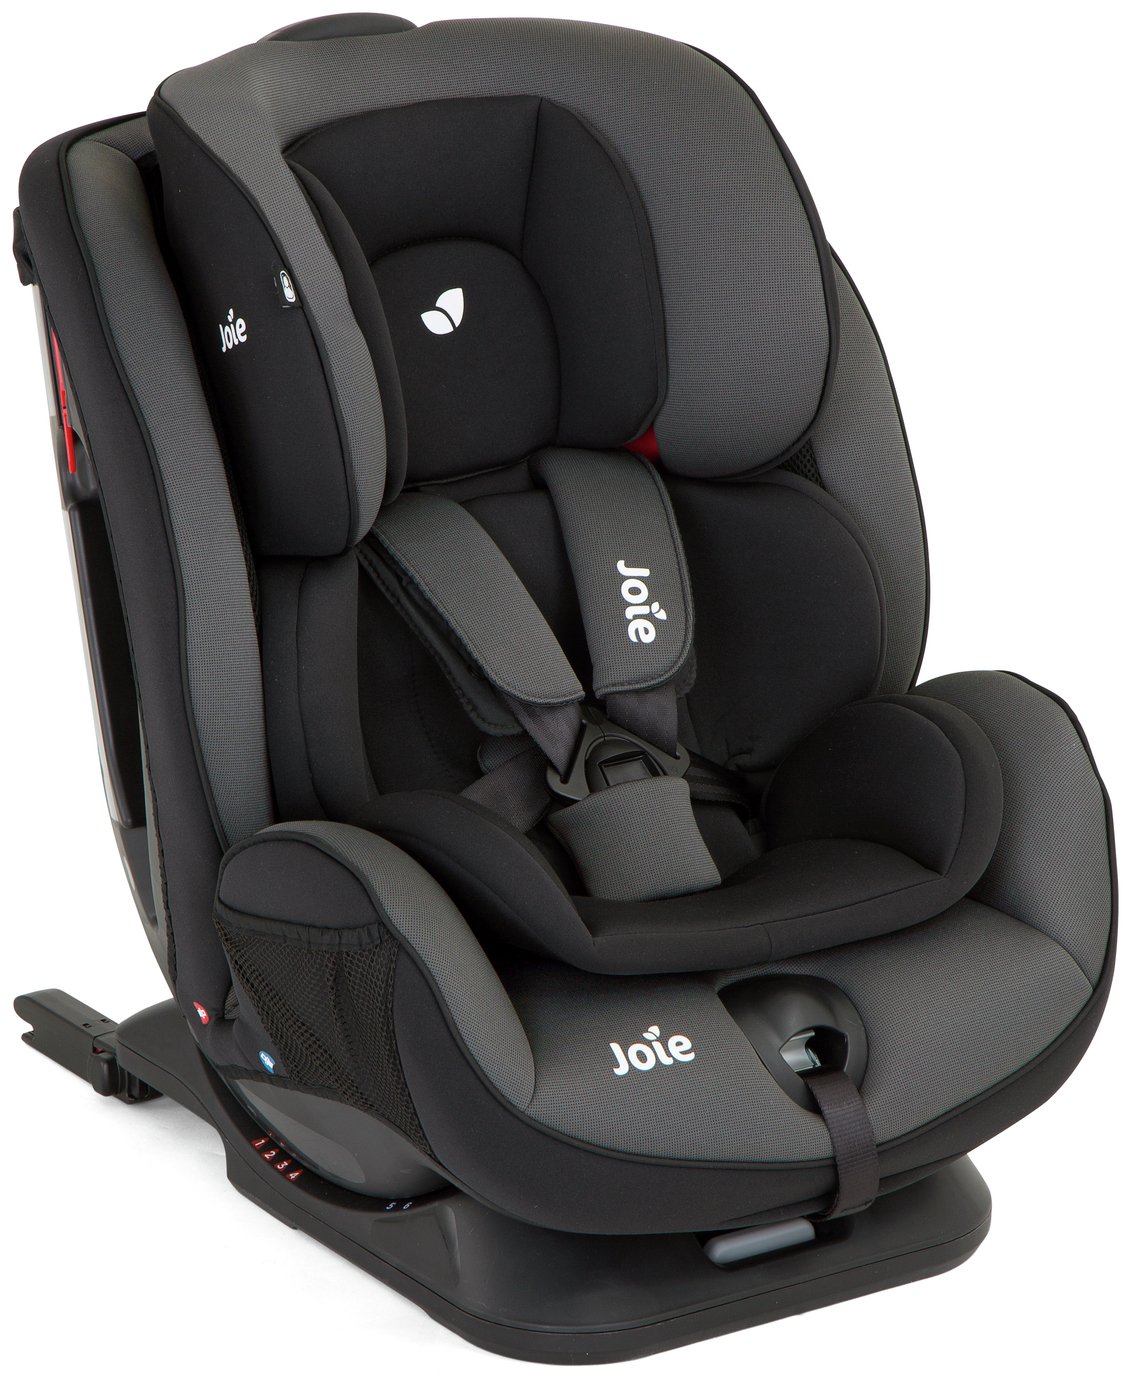 Joie Stages FX Group 0 /1/2 Car Seat - Black